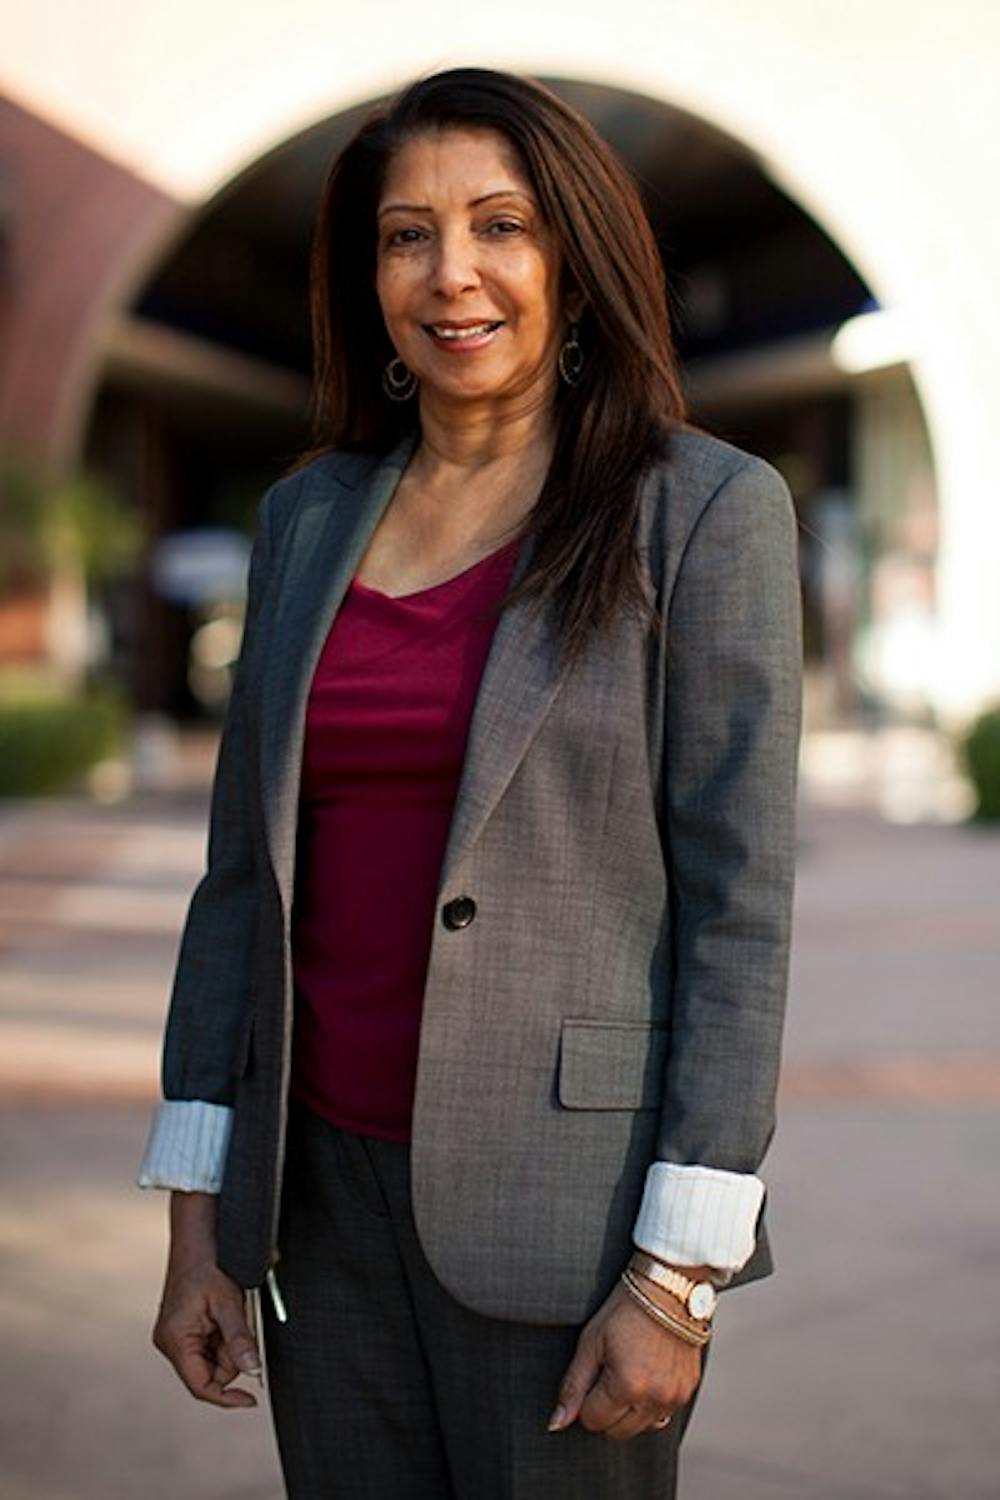 Former vice chair and a current adjunct professor for biomedical informatics at ASU Vimla Patel has been selected to receive the Hind Rattan Award for 2014. The award is being given to Patel to recognize her contributions and services to her expertise field. (Photo by Ryan Liu)